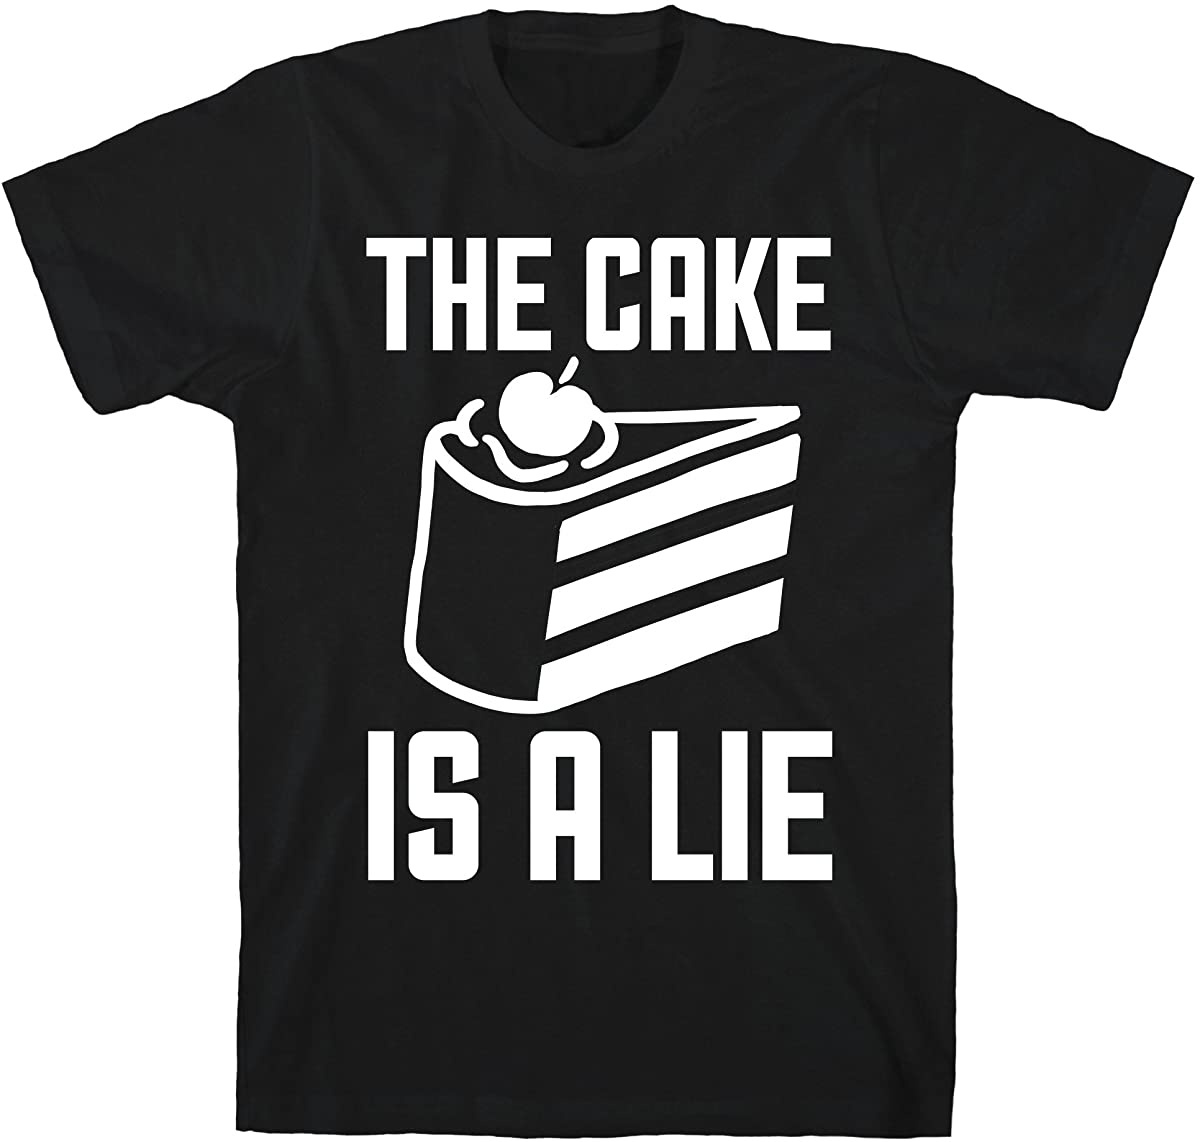 Life is a lie. Майка the Cake is a Lie!. Футболка OEM. Футболка Cake. Кружка the Cake is a Lie.